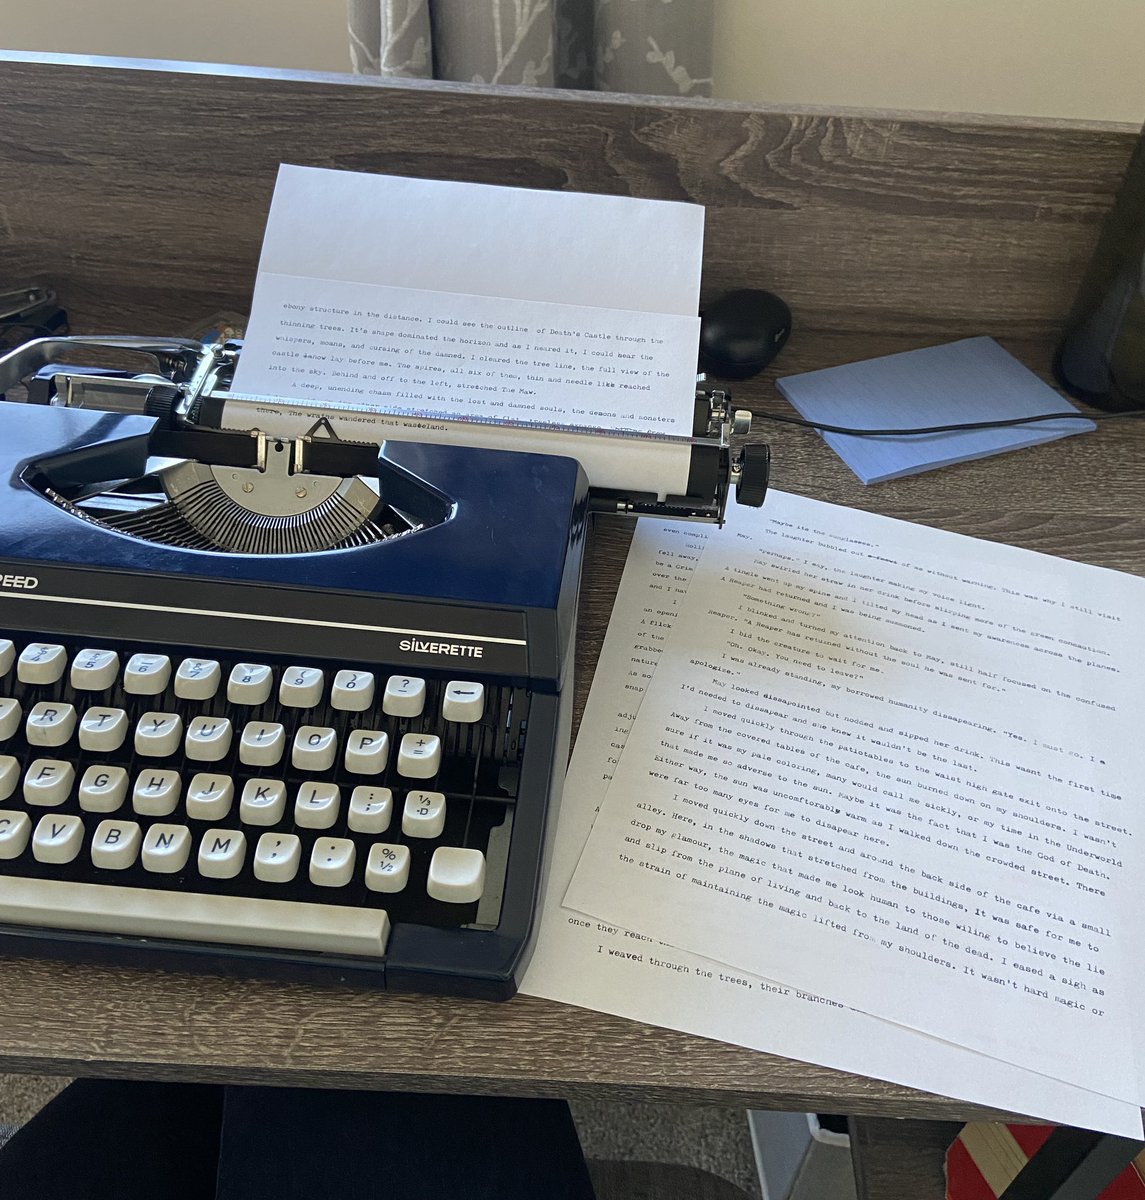 Starting on my next project! I don’t really have a timeline for this one, as my focus will soon shift back to #shadowspast and it’s publication but I’m the meantime, I’m enjoying working on Miss Blue again #amwritingfantasy #manualtypewriter #silverreed